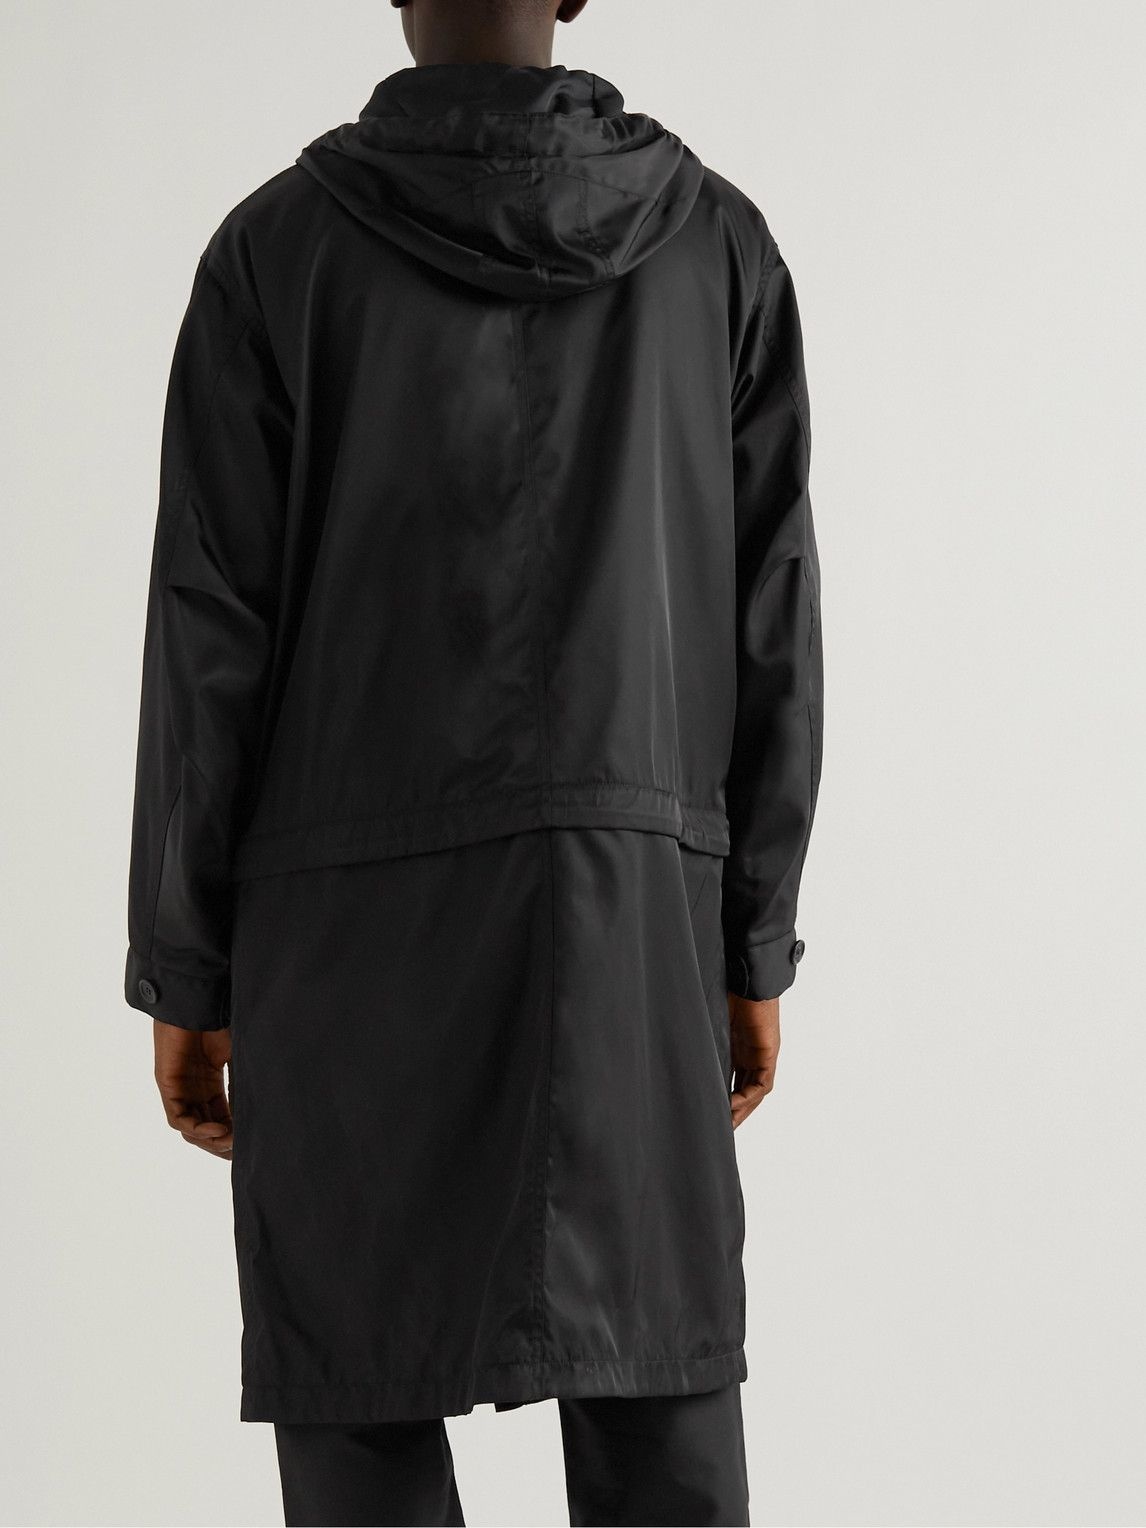 Dunhill - Compendium Convertible Shell Hooded Parka - Black Dunhill